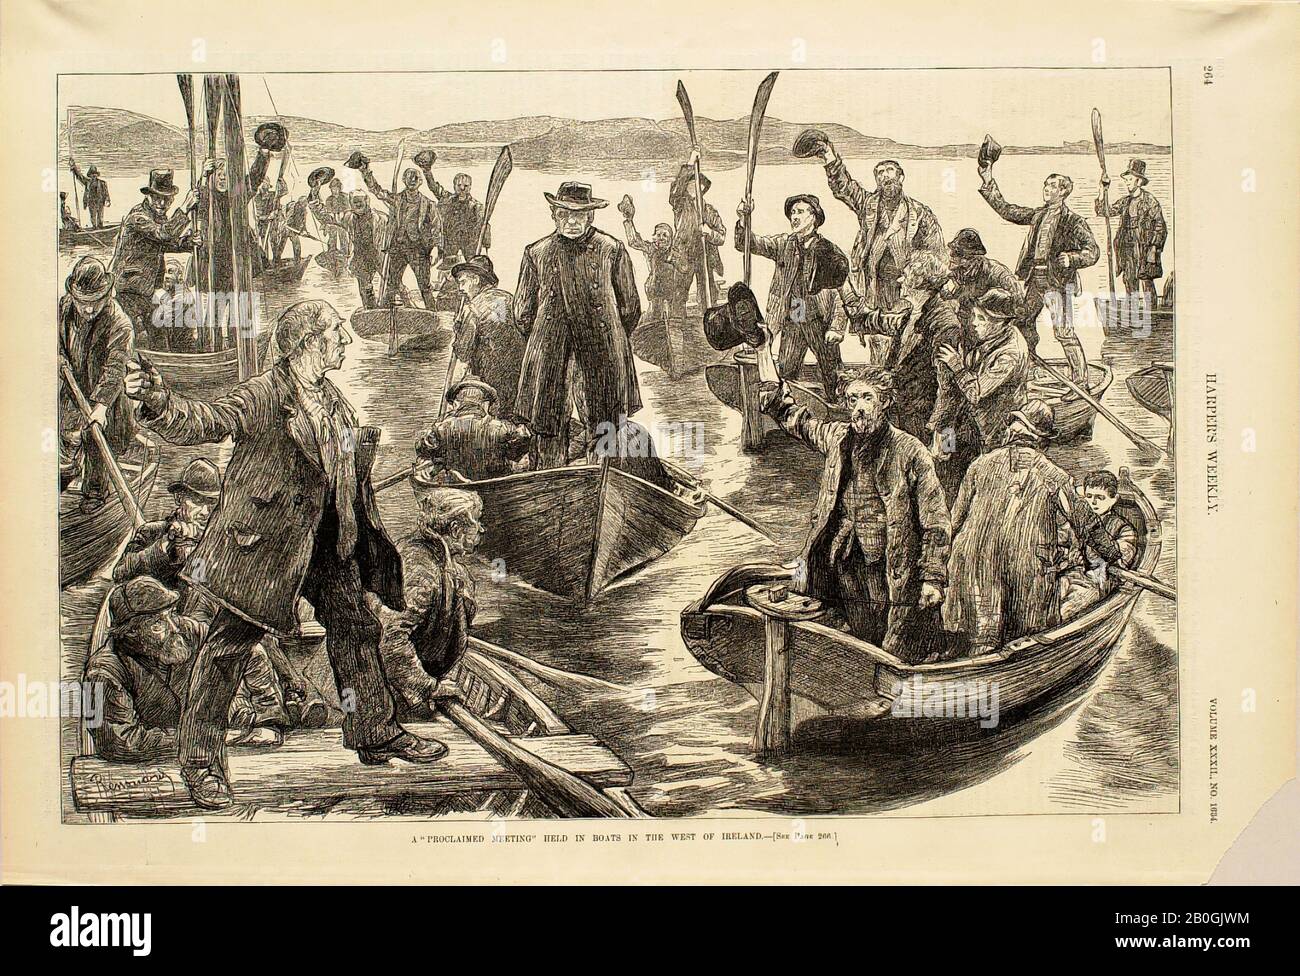 Paul Renouard, French, 1845–1925, A 'Proclaimed Meeting' Held in Boats in the West of Ireland, 1888, Wood engraving on paper, image: 9 1/4 x 13 13/16 in. (23.5 x 35.1 cm Stock Photo